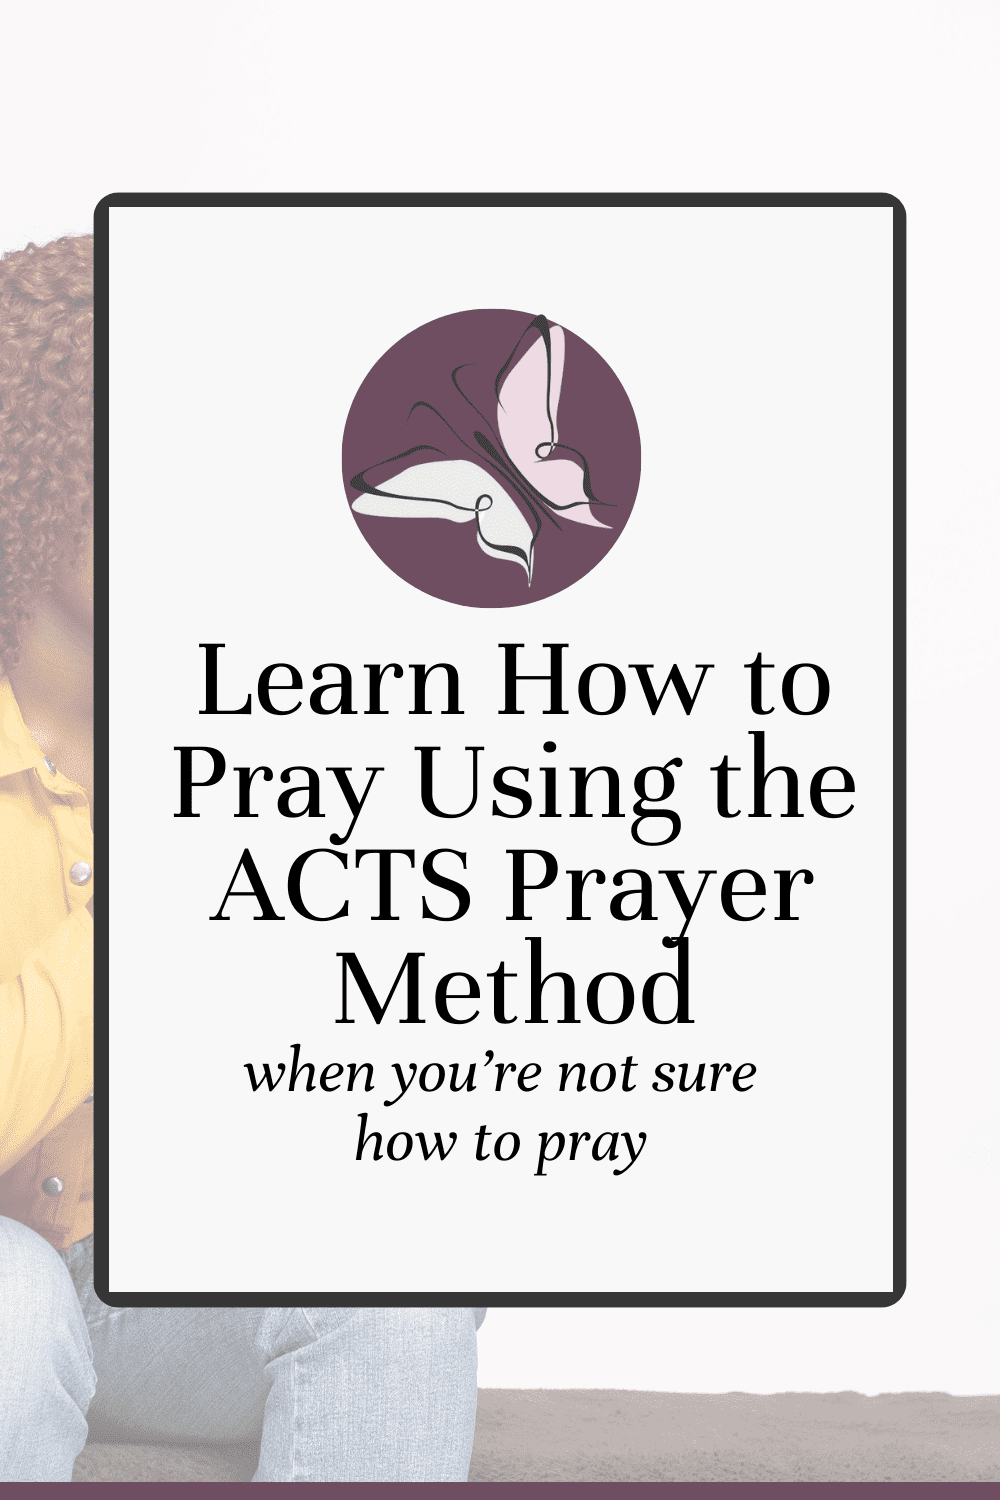 Struggling to know how to pray? The ACTS prayer method is an easy way to pray effectively. Perfect for beginners, kids and when you aren't sure how to pray during hard times.